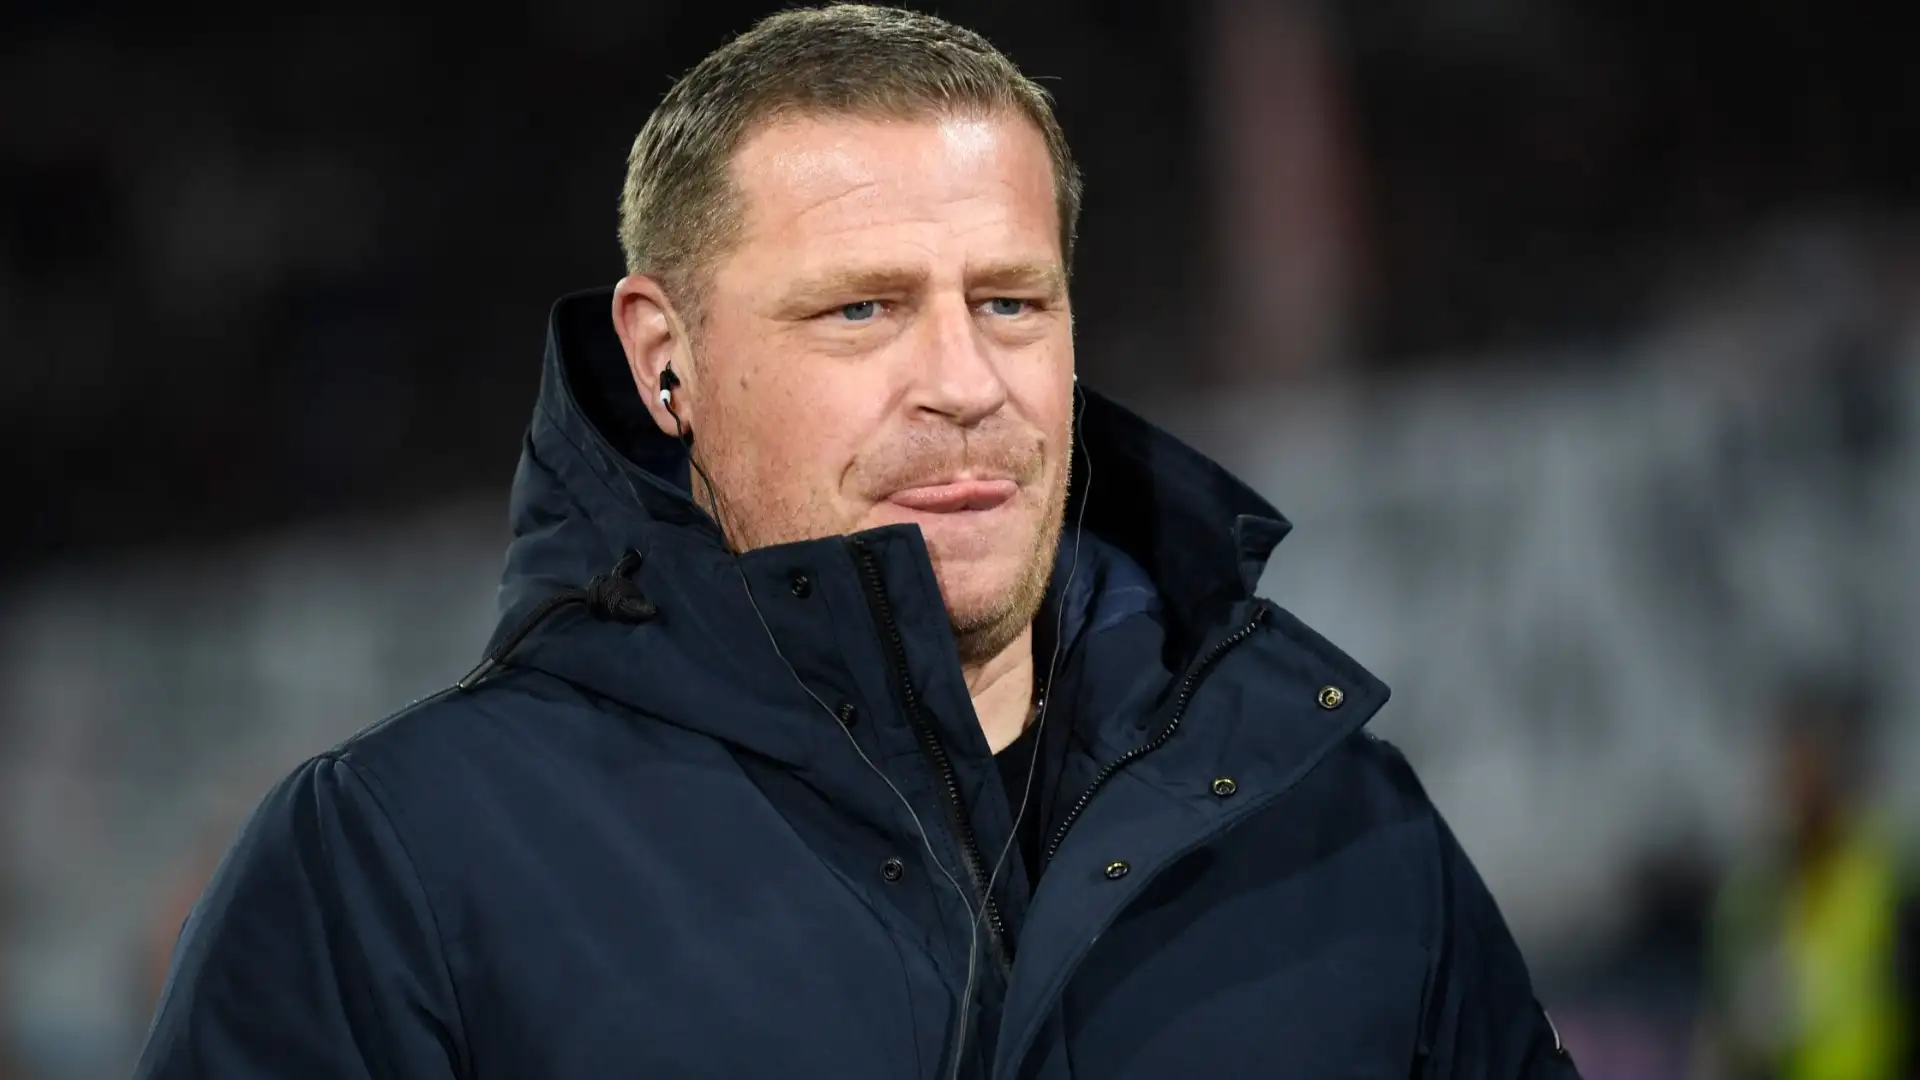 'Of course we're annoyed!' - Bayern's hopeless search for new coach angers Max Eberl as Roberto De Zerbi emerges as possible candidate after Xabi Alonso, Ralf Rangnick and Hansi Flick approaches fall through